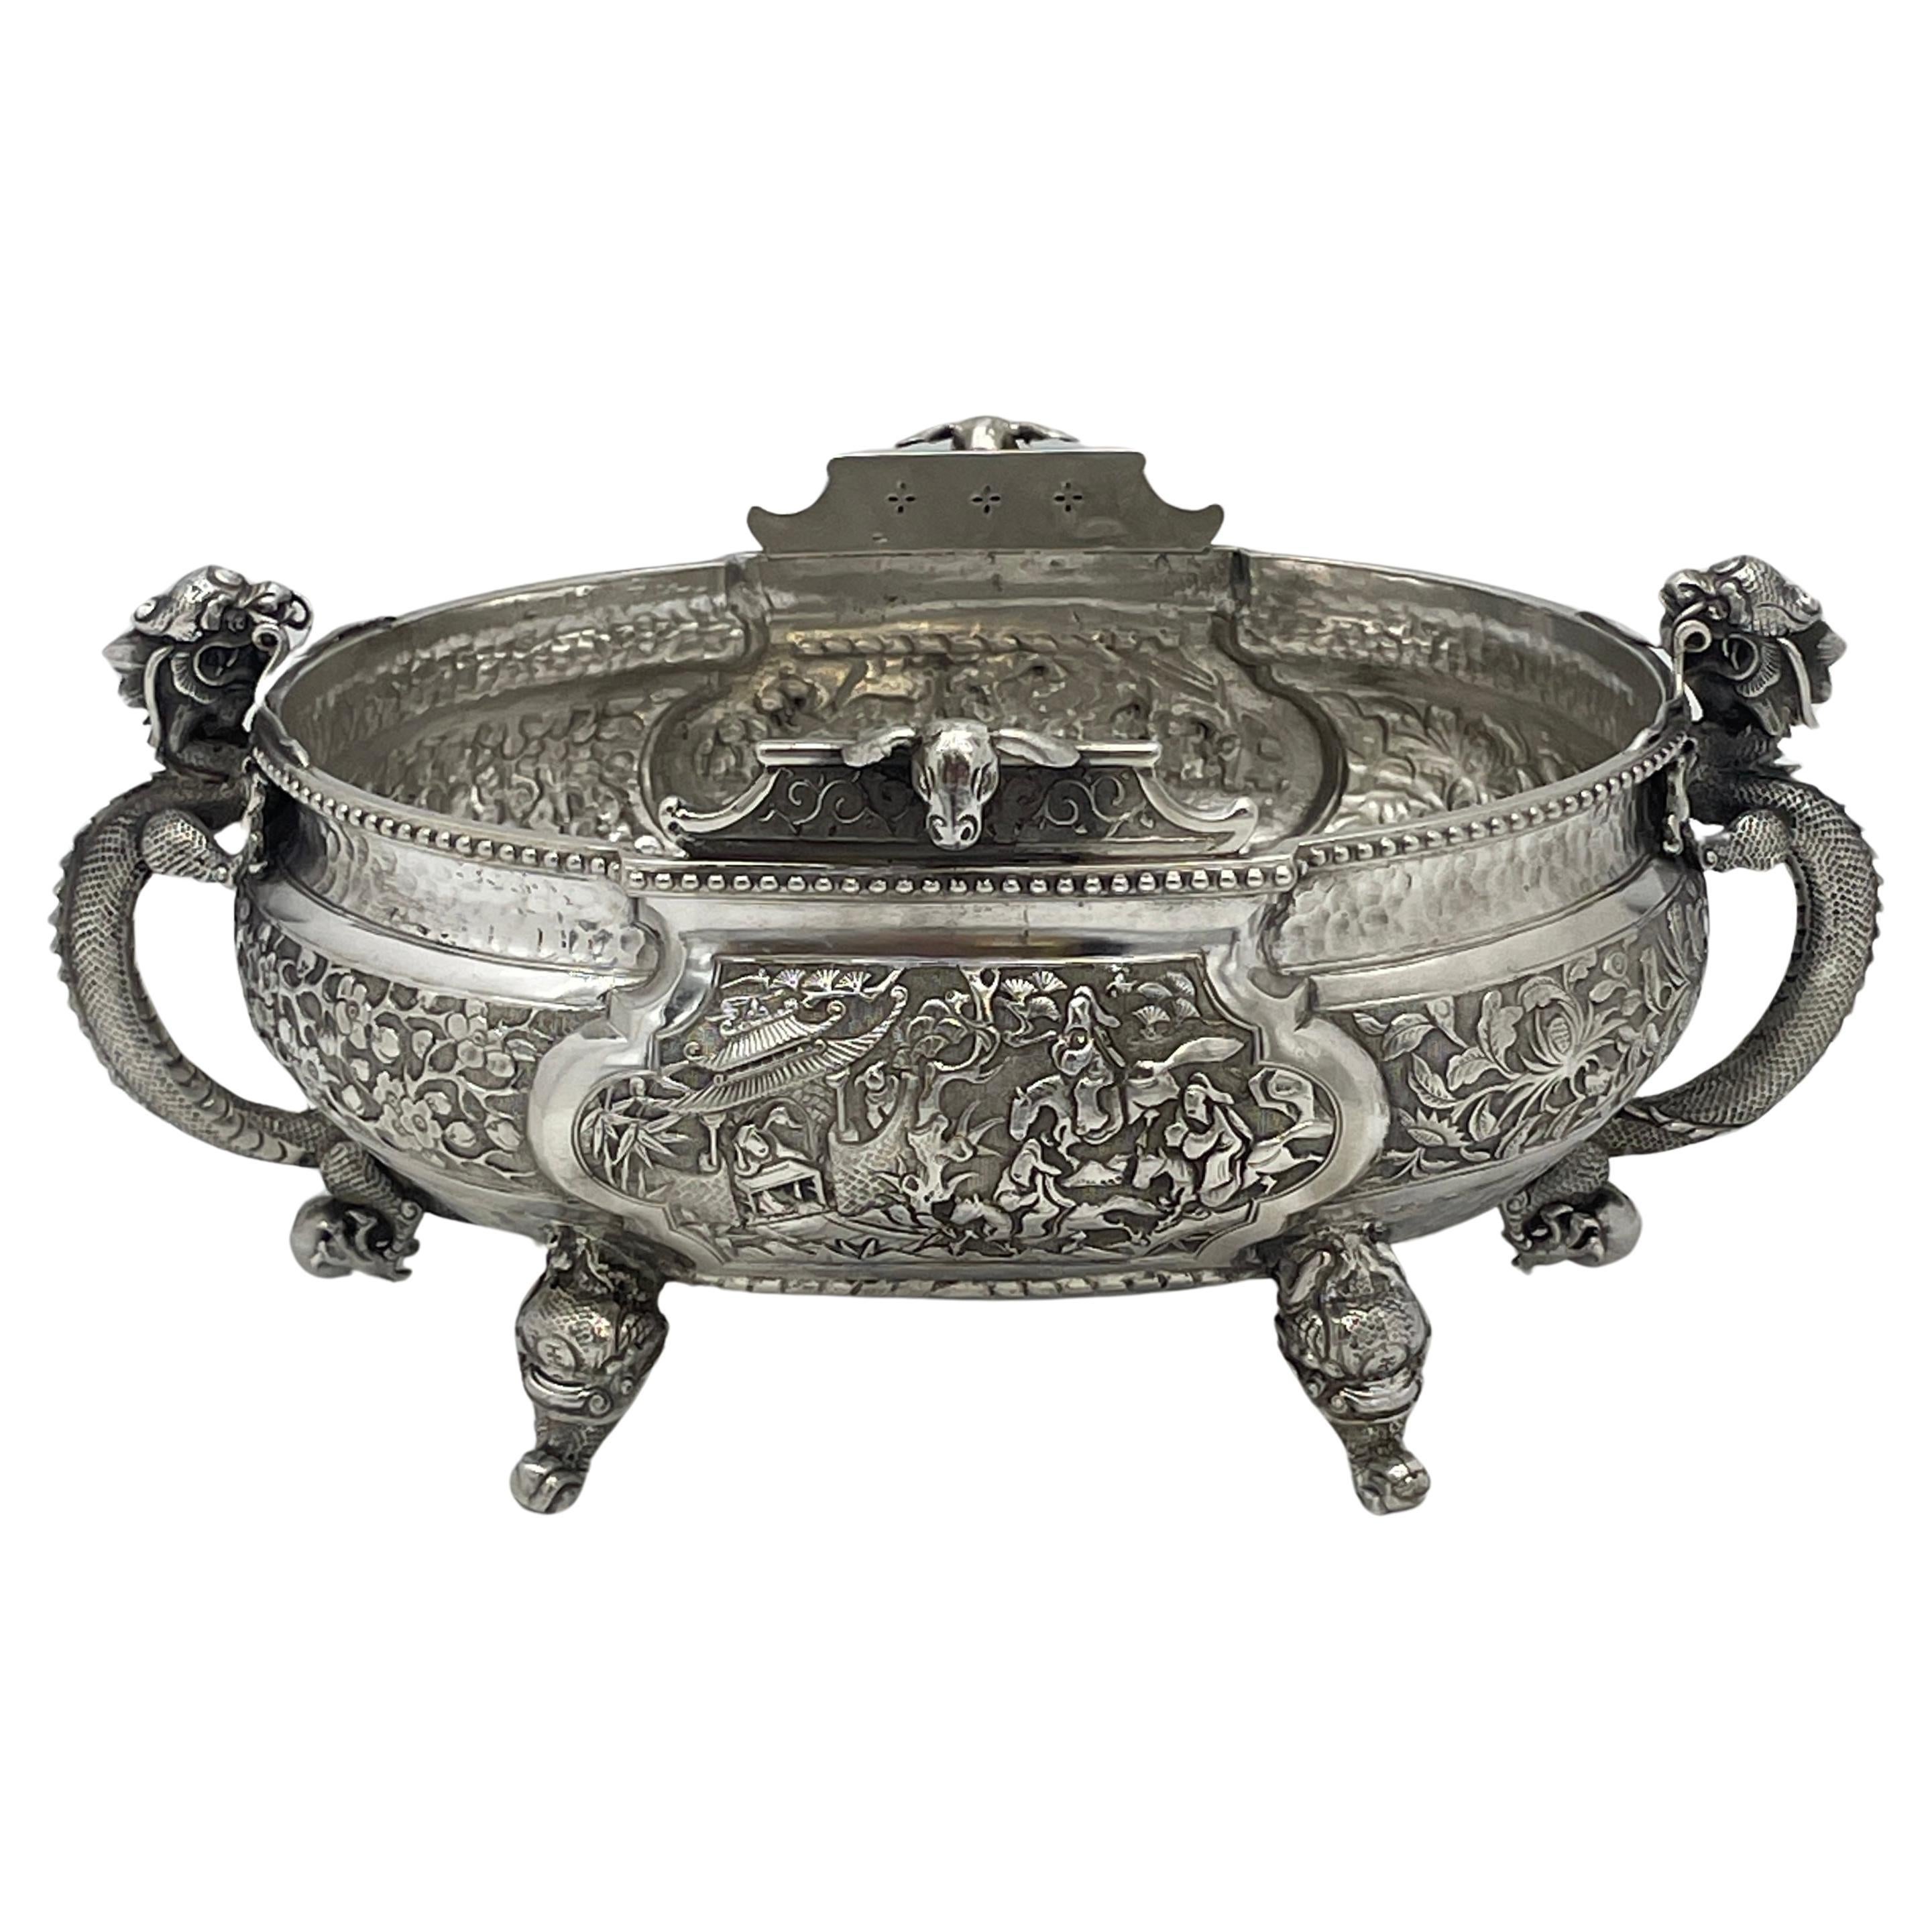 Chinese Export Silver Bowl For Sale